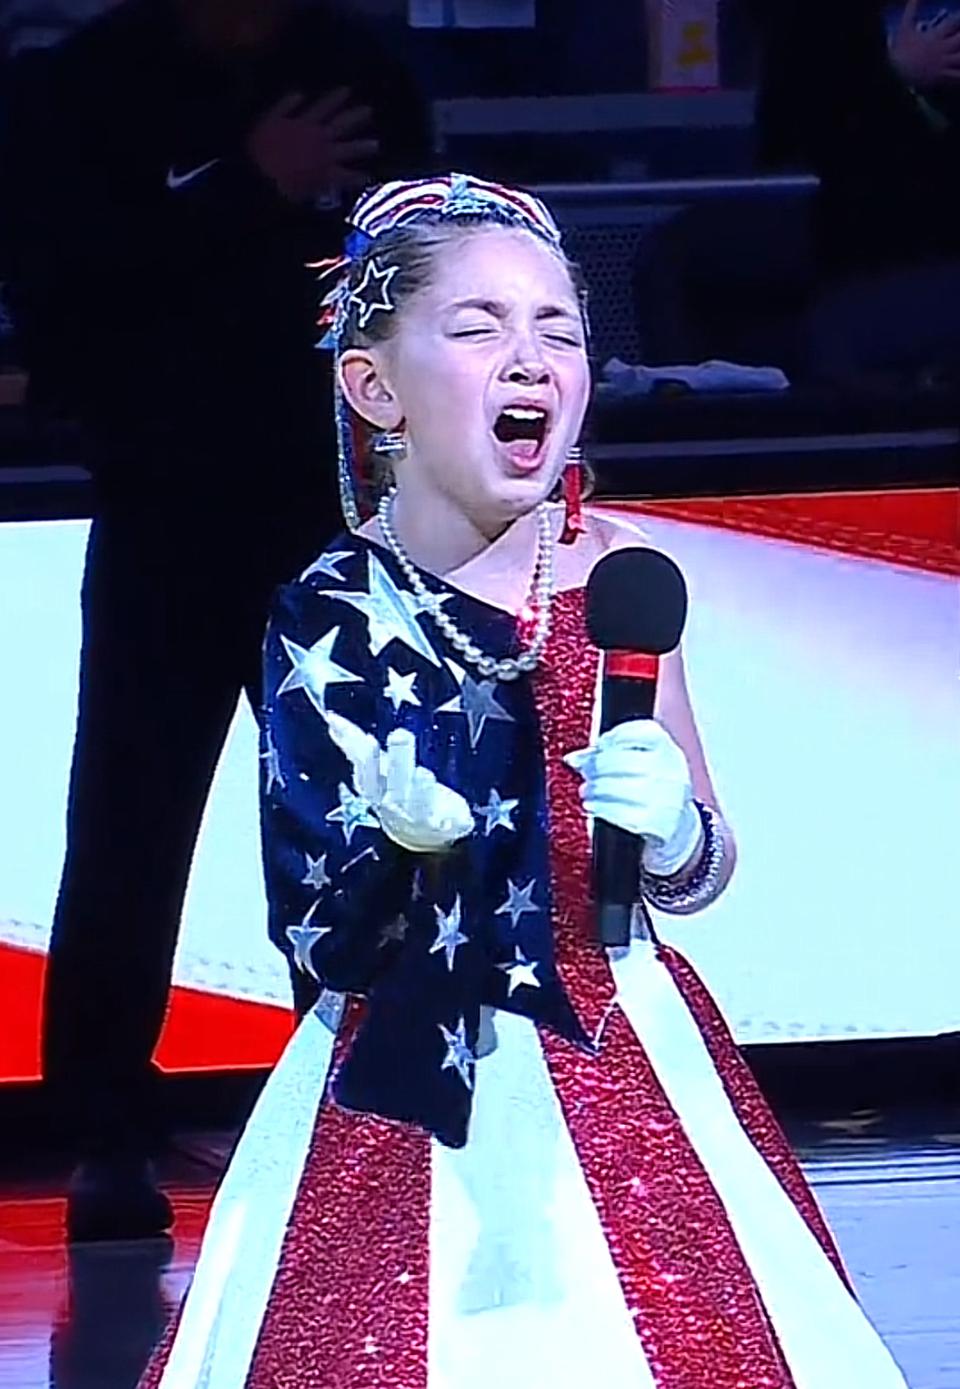 Kinsley Murray singing the National Anthem at the Pacers game